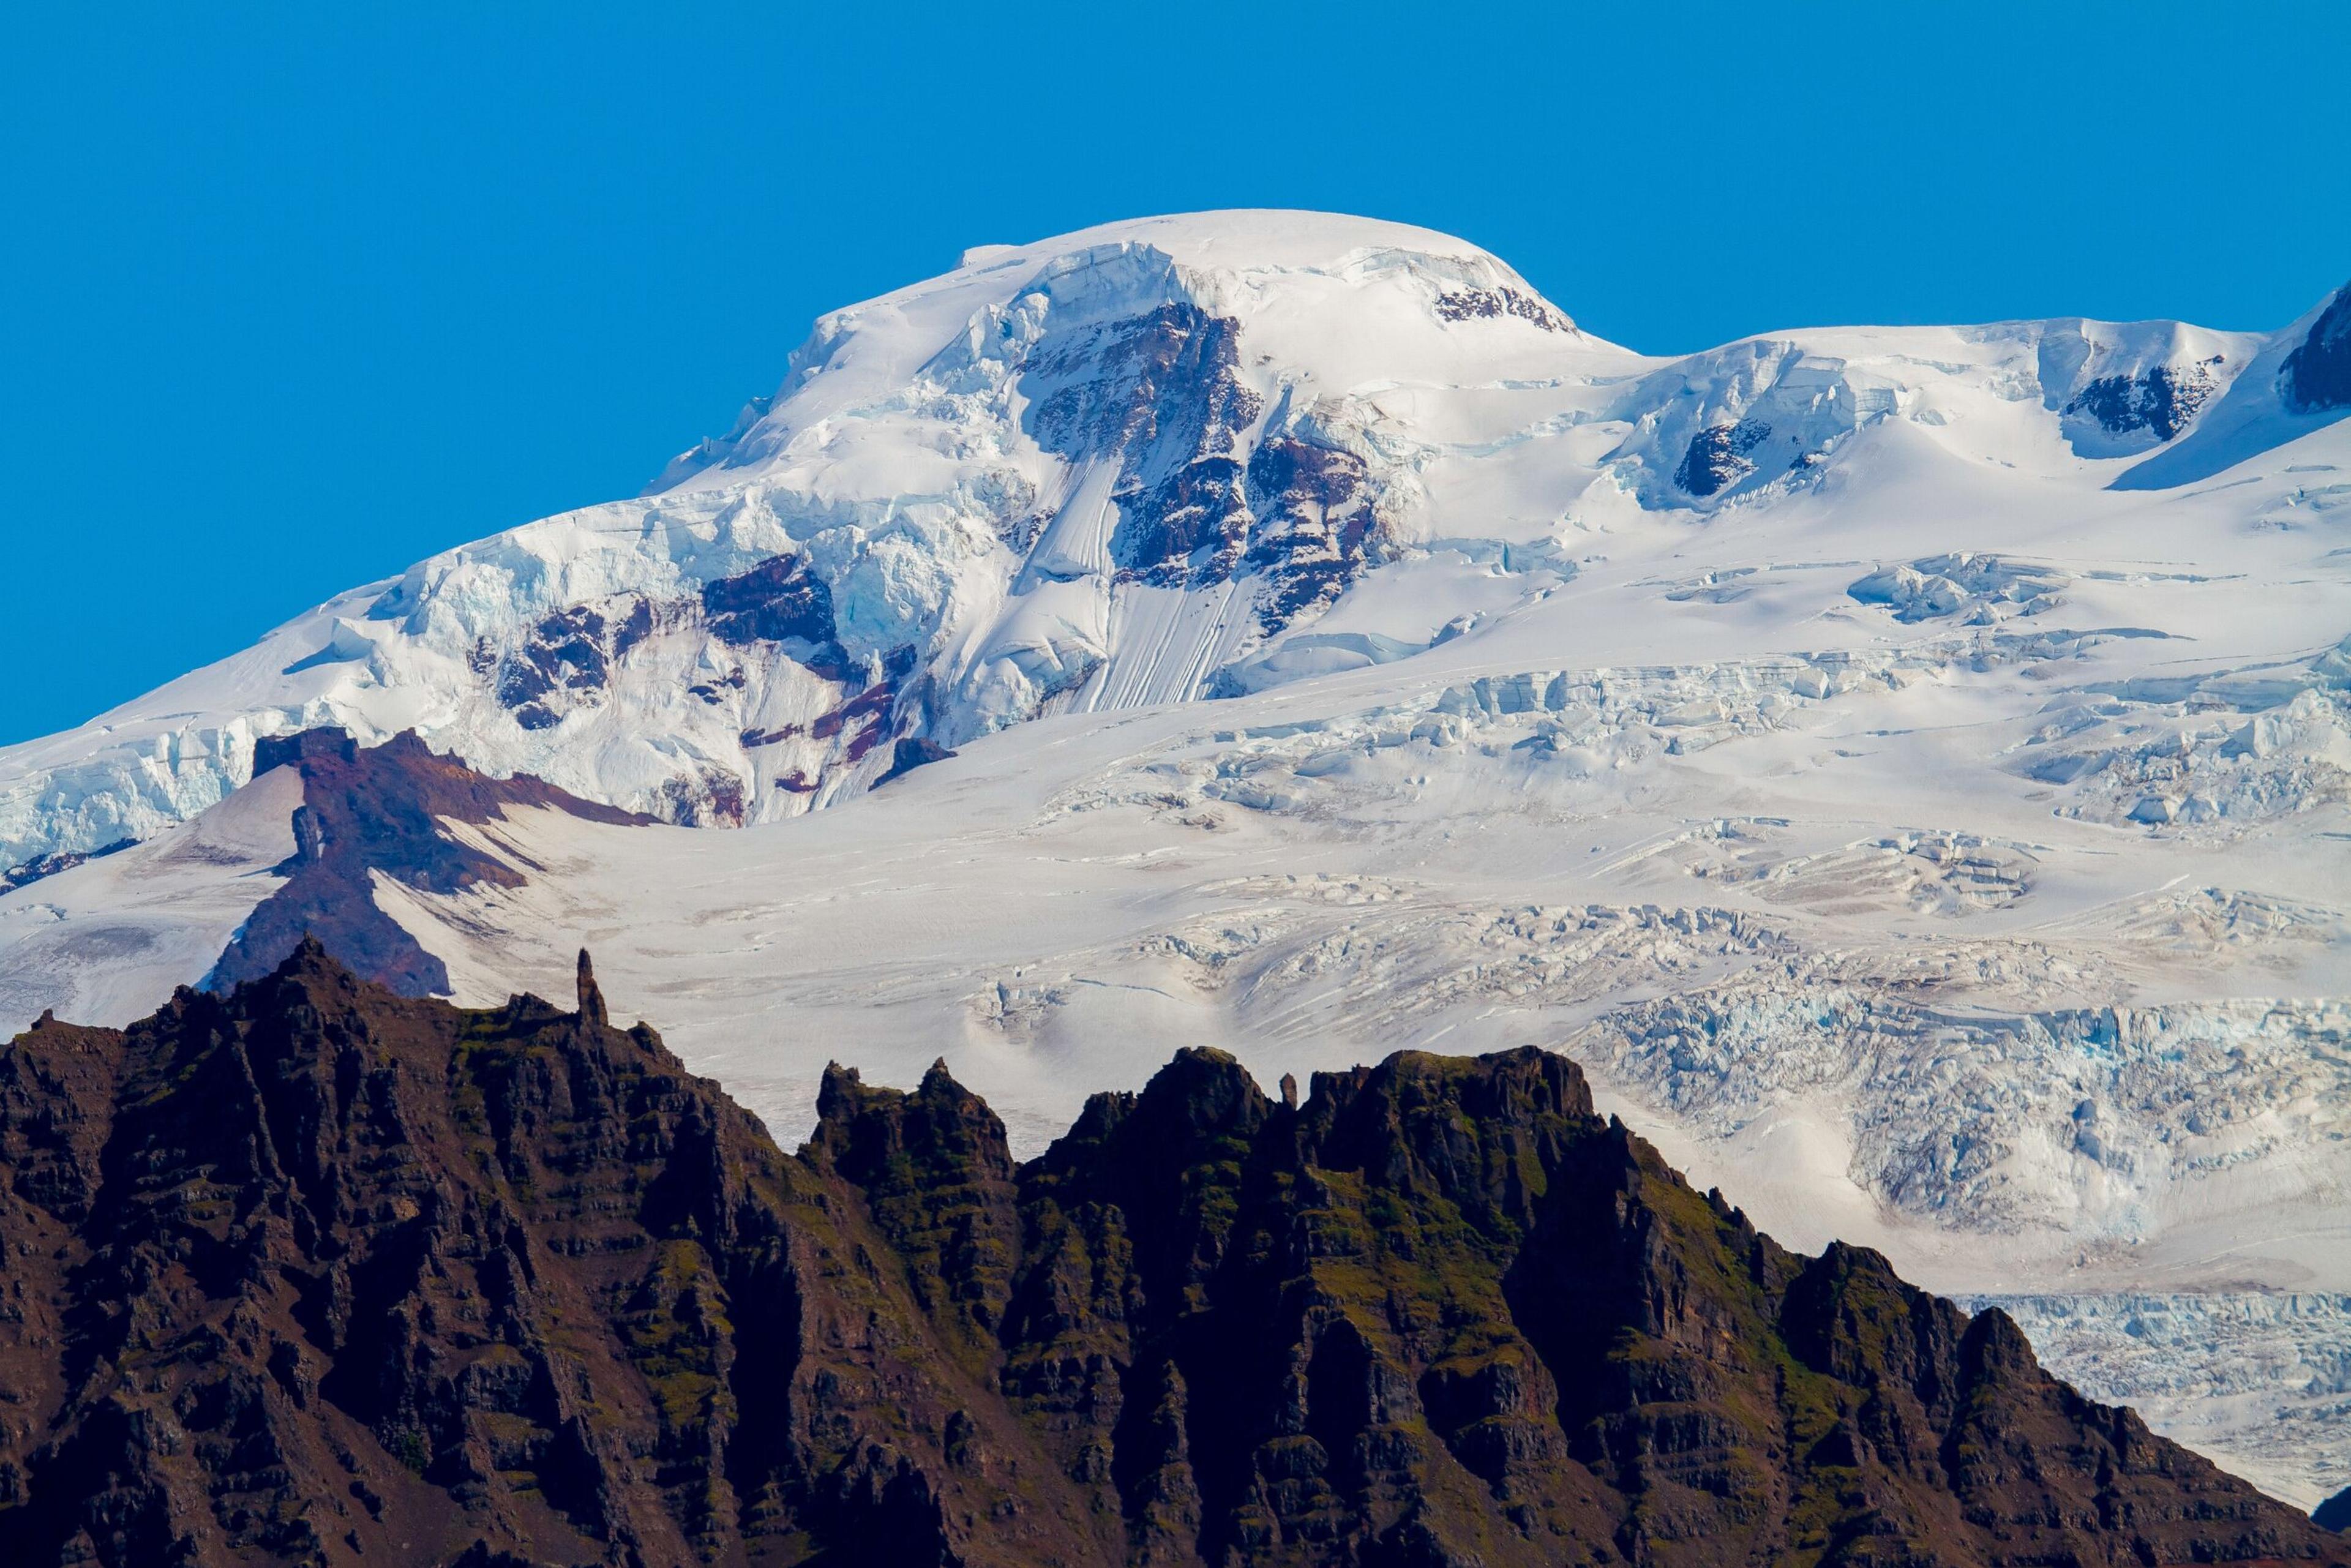 Snow-covered summit of Hvannadalsnjúkur with icy outcroppings against a clear sky